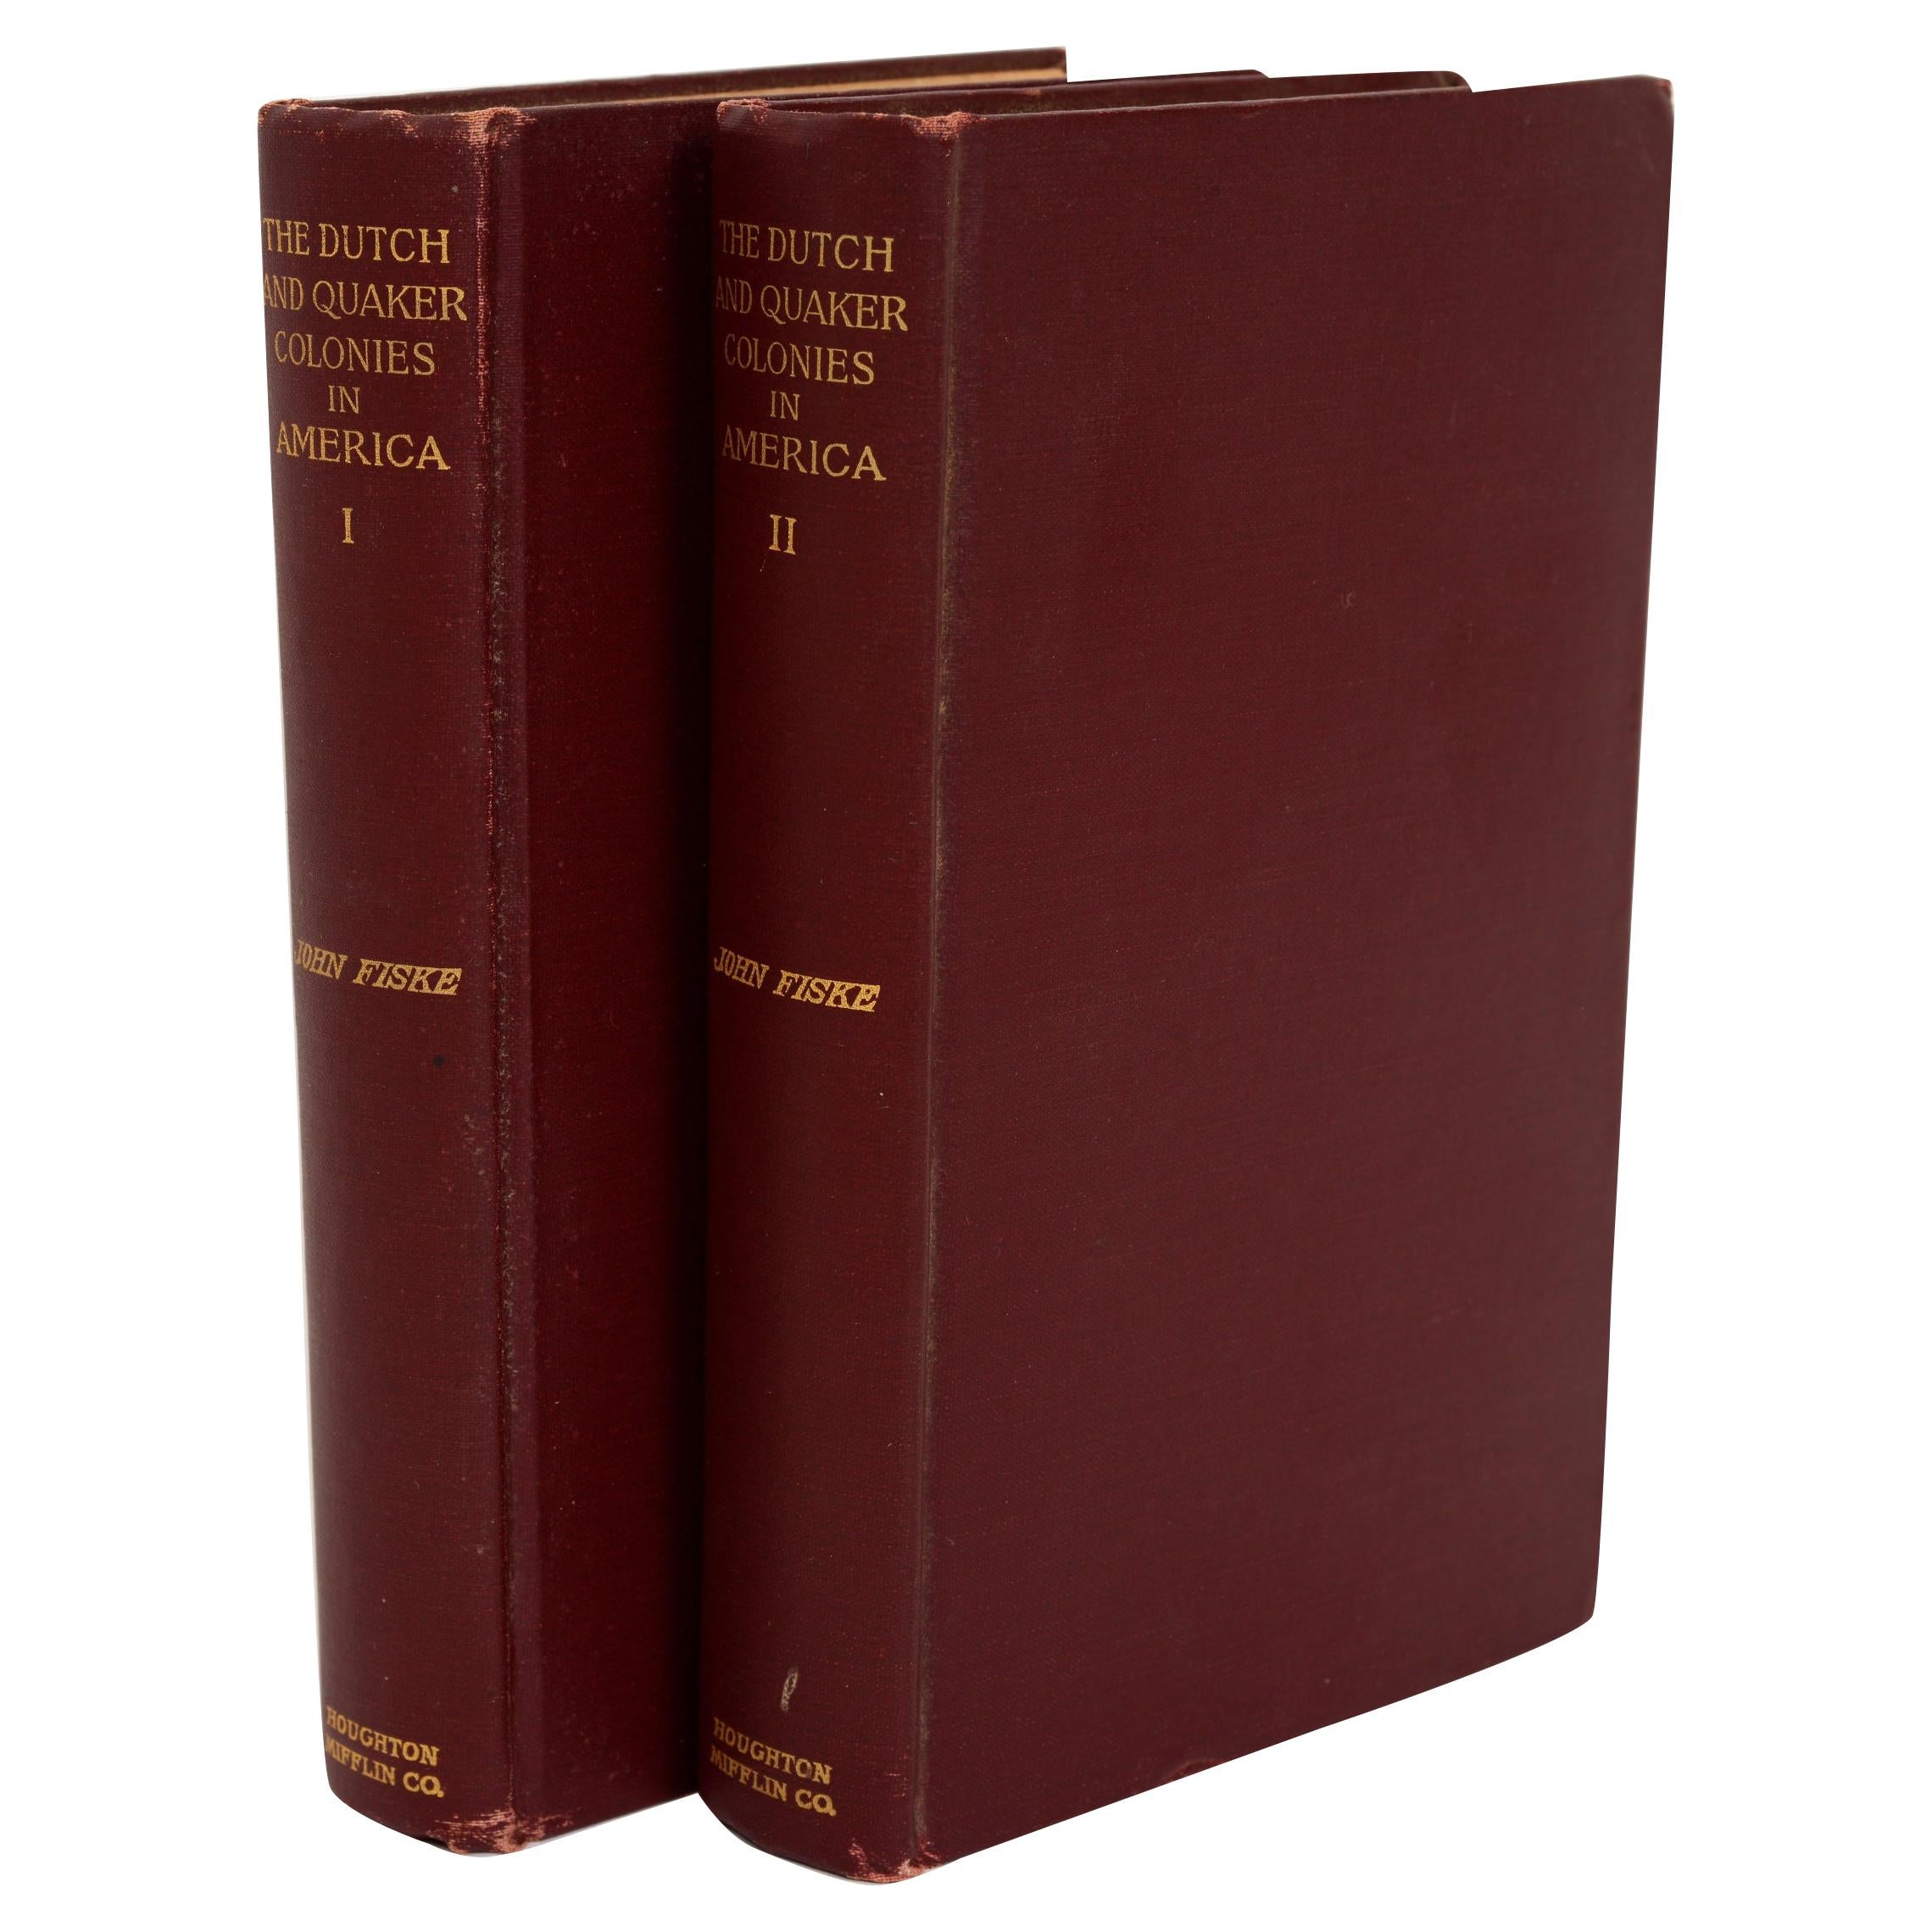 The Dutch and Quaker Colonies in America, 1899, in Two Volumes, 1st Edition